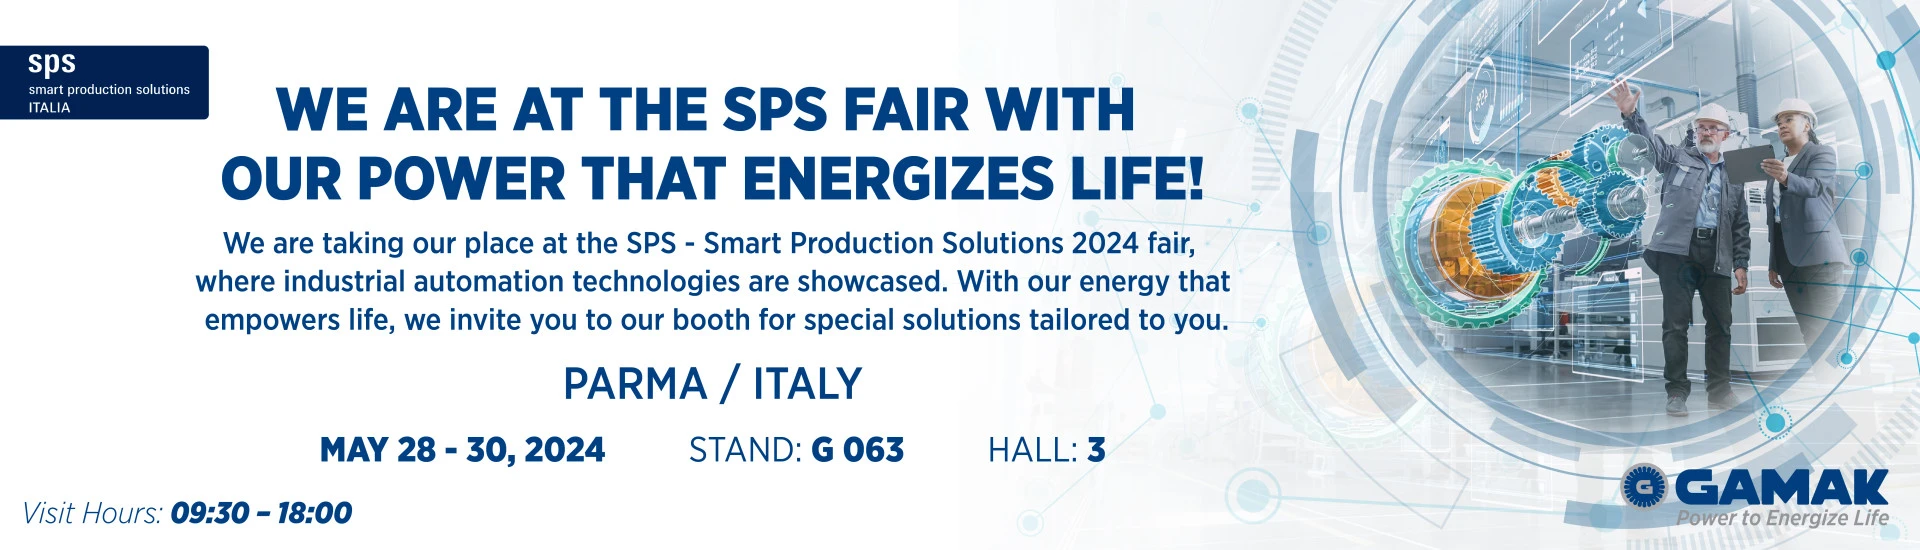 Taking Industrial Automation a Step Further: GAMAK at the SPS Fair in Parma, Italy!